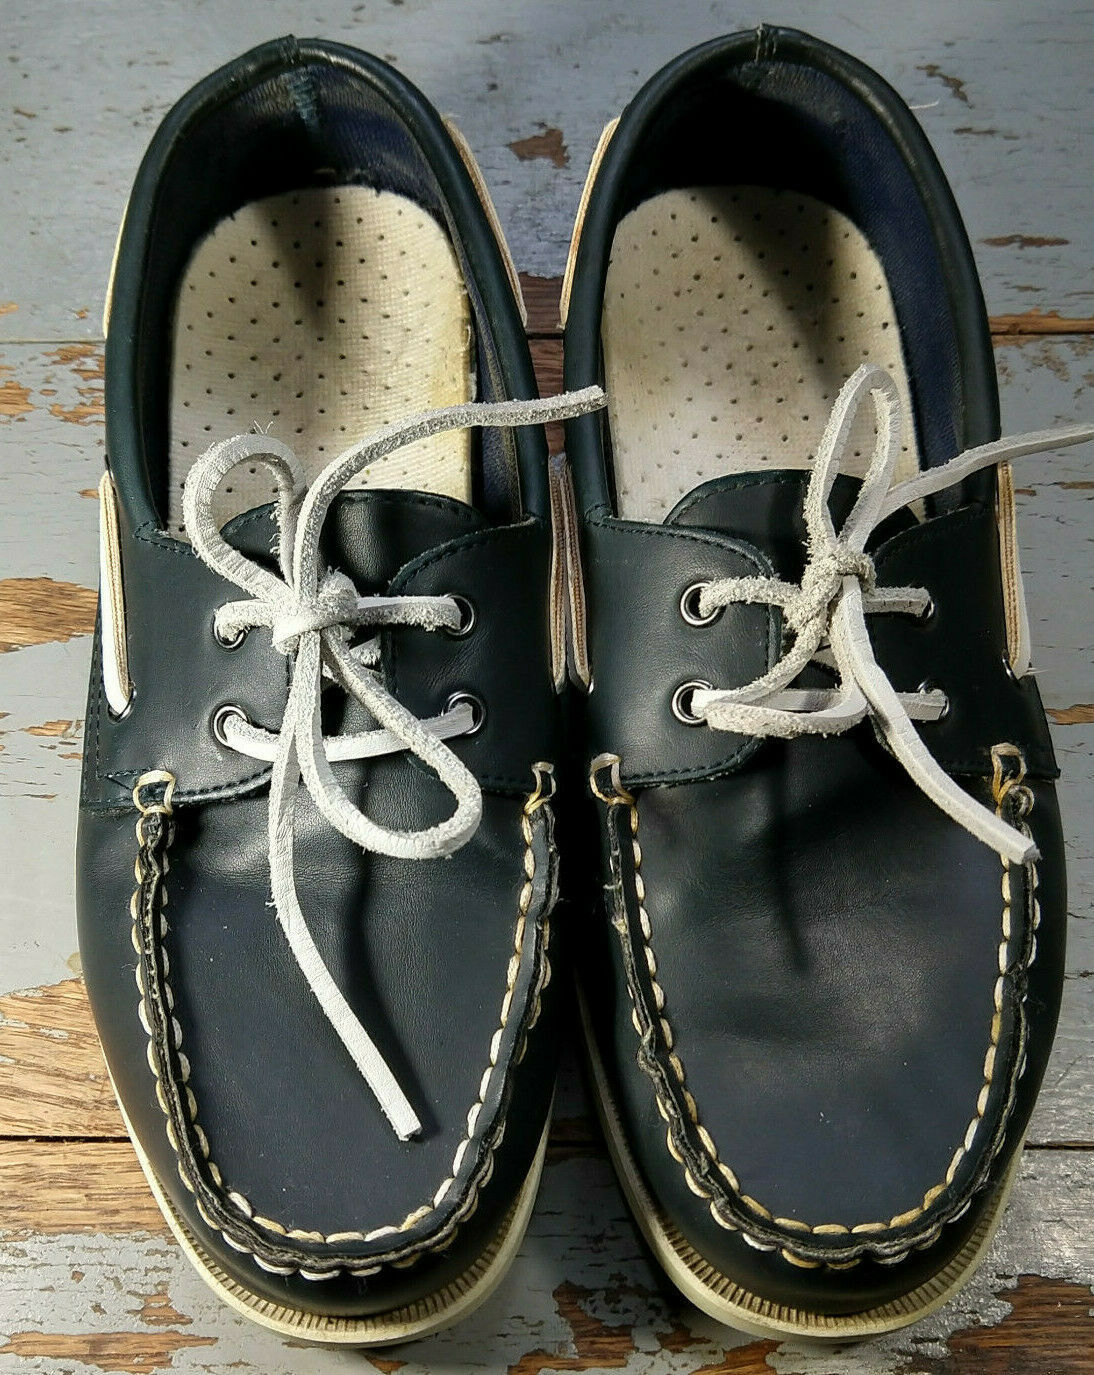 Vintage Thom McAn Classic Navy Boat Shoes Docksiders Size Men's 7M ...